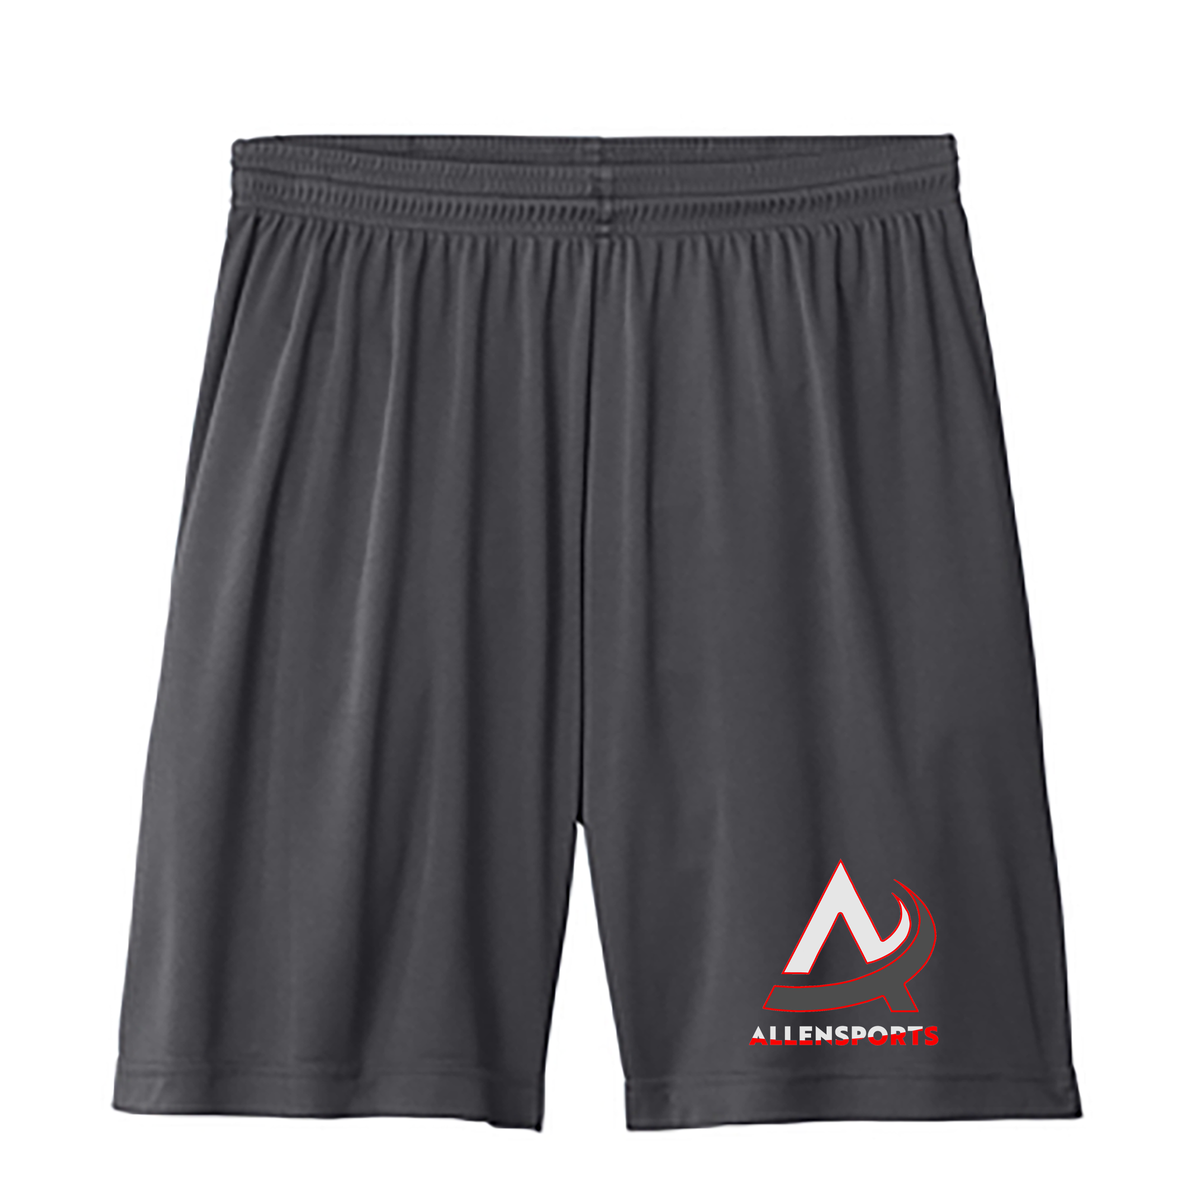 AllenSports PosiCharge Competitor 7" Short